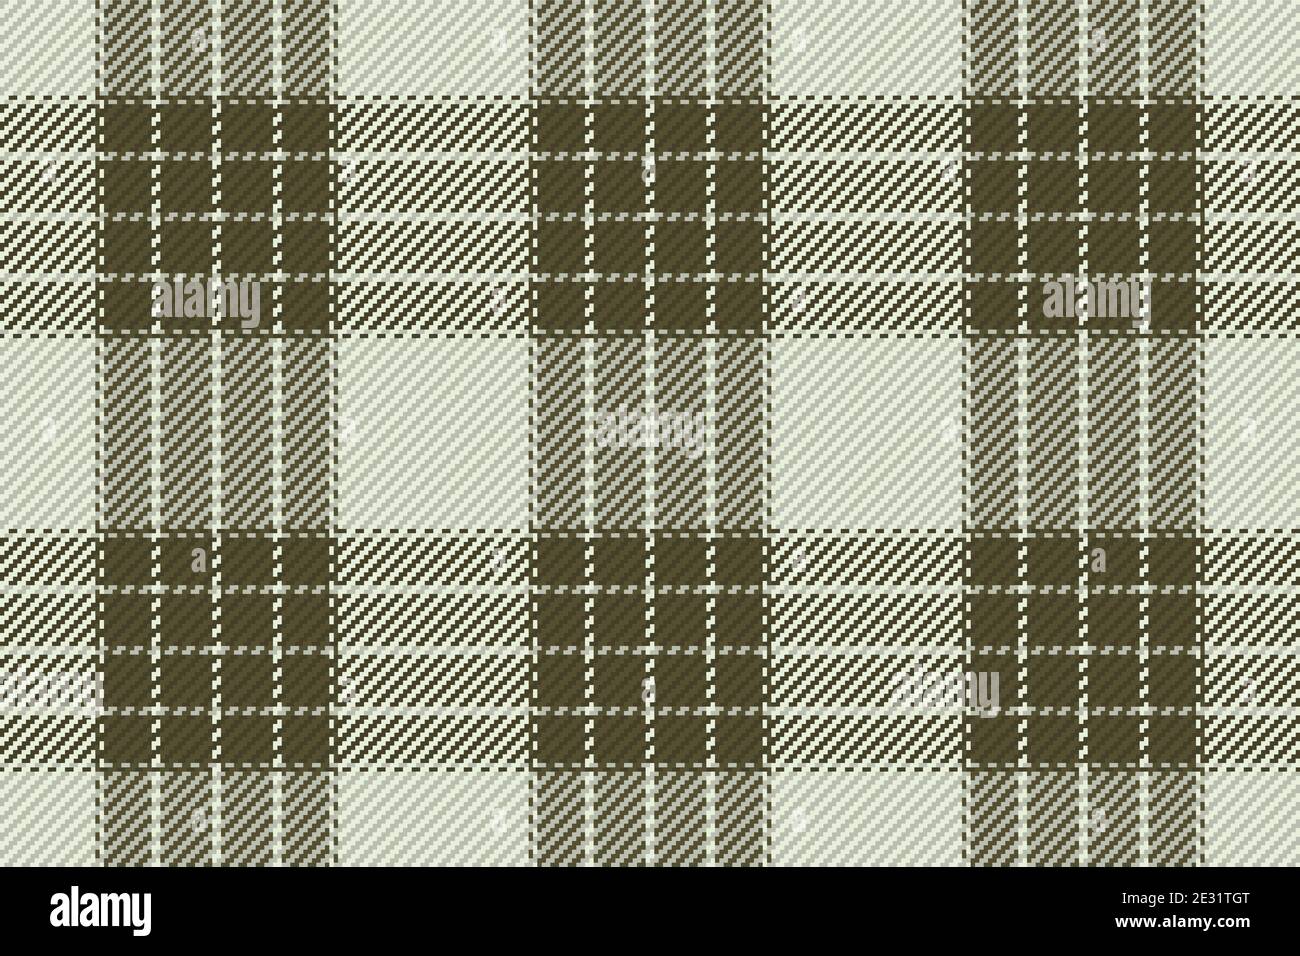 Tartan plaid pattern seamless vector background. Check plaid for flannel shirt, blanket, throw, or other modern textile design. Stock Vector